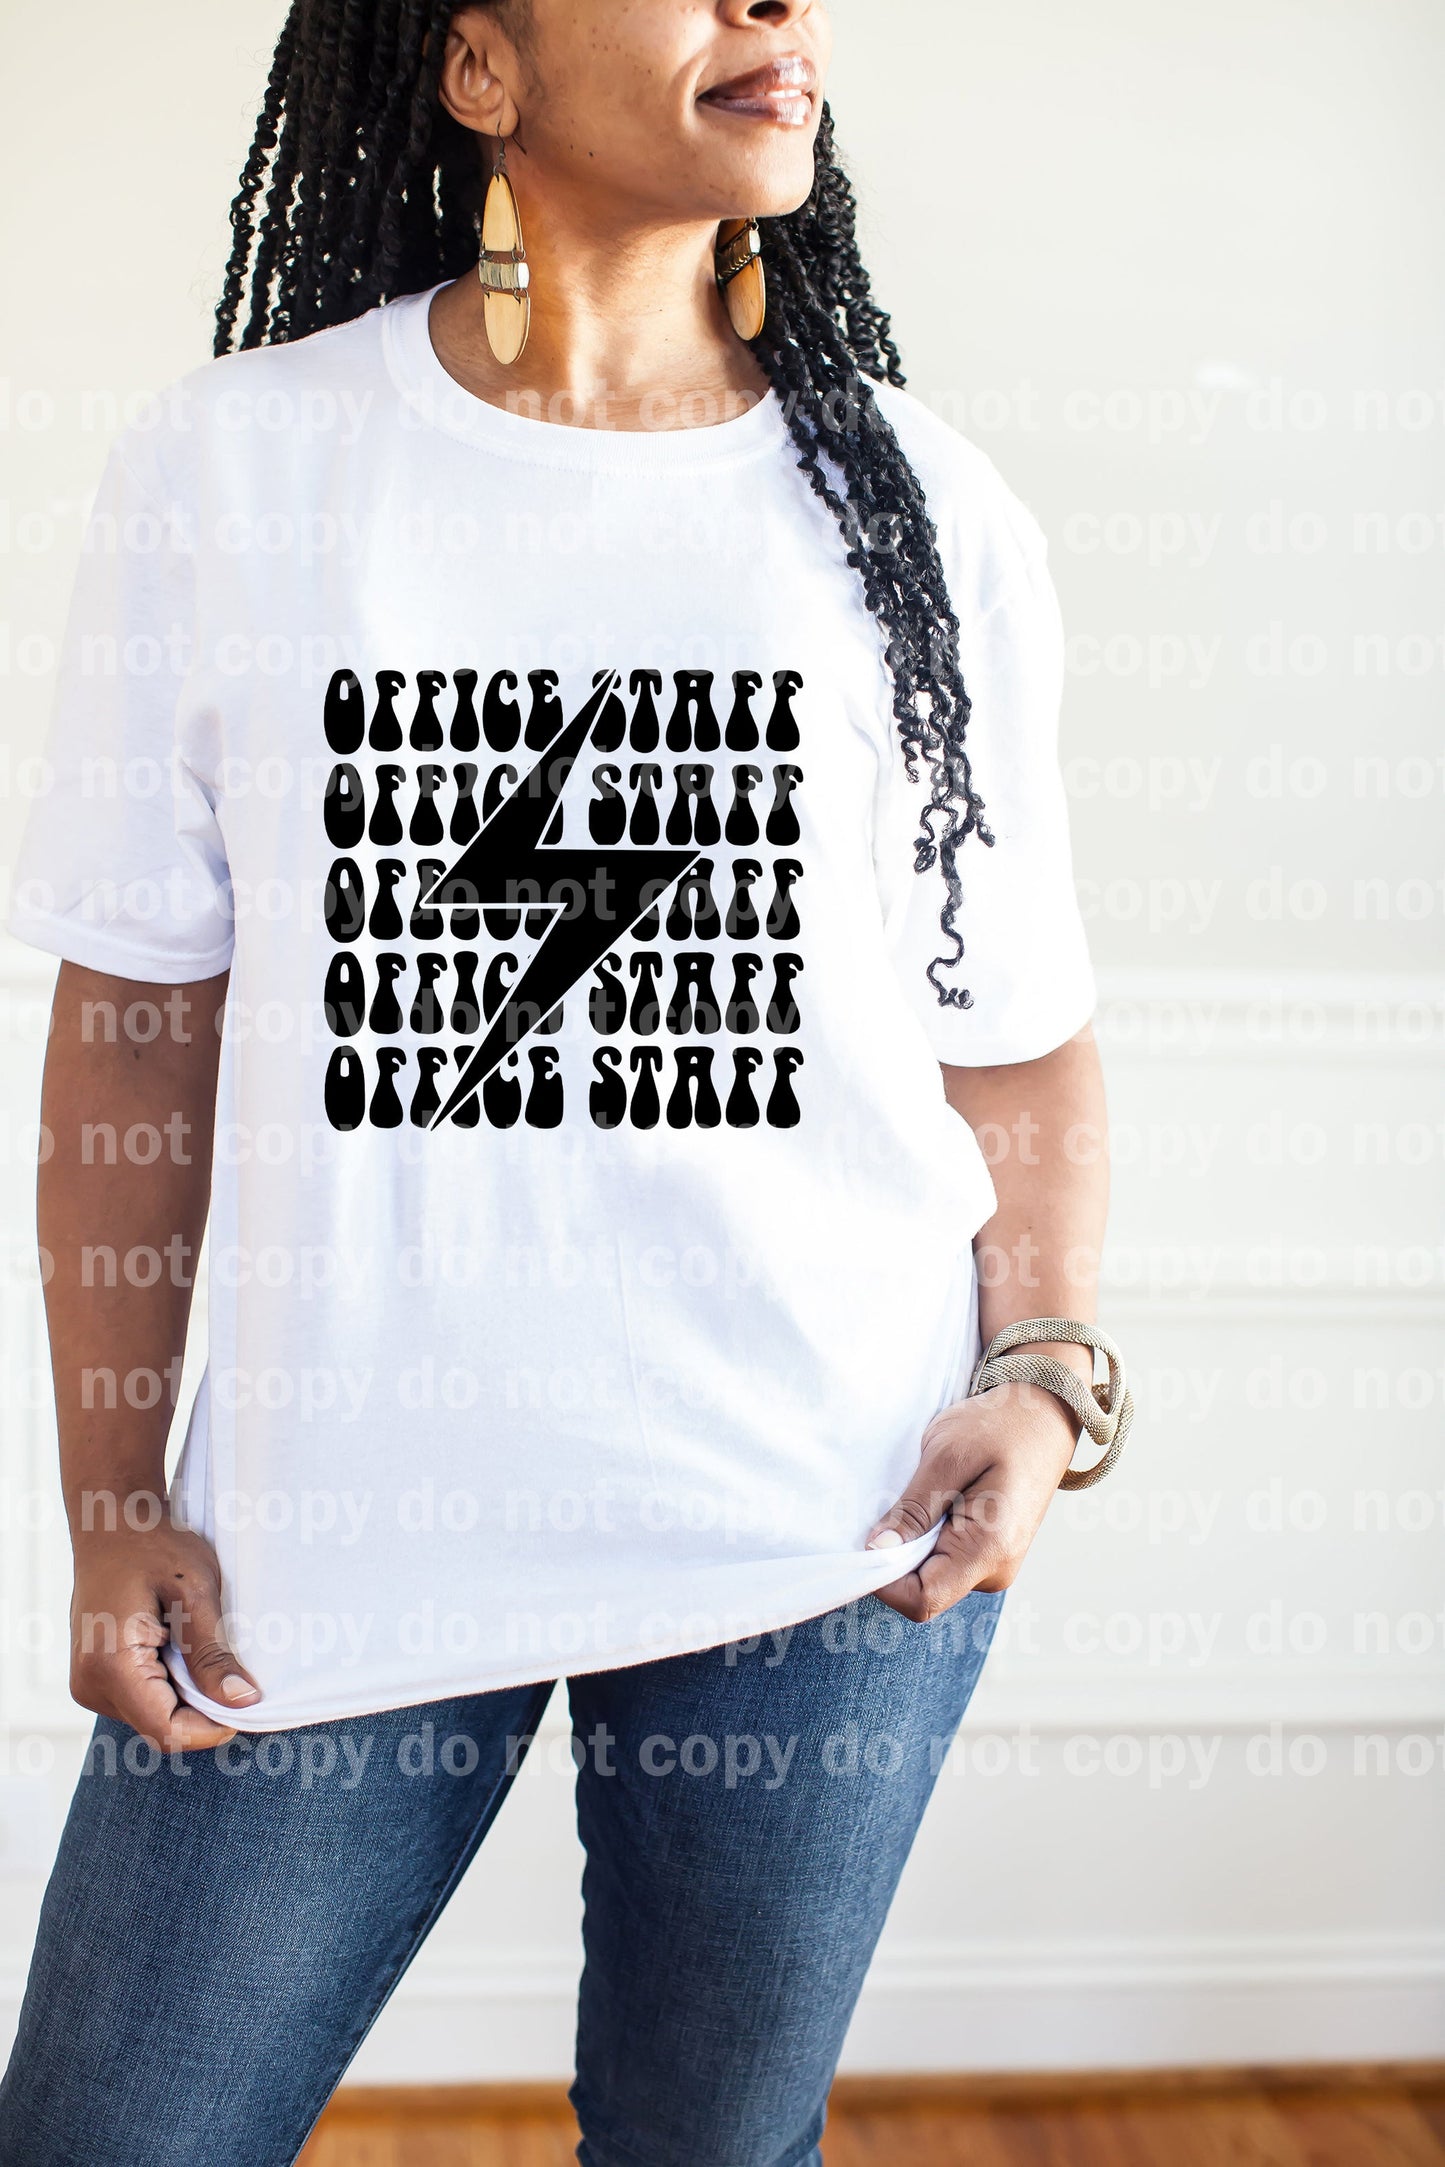 Office Staff Black/White Dream Print or Sublimation Print